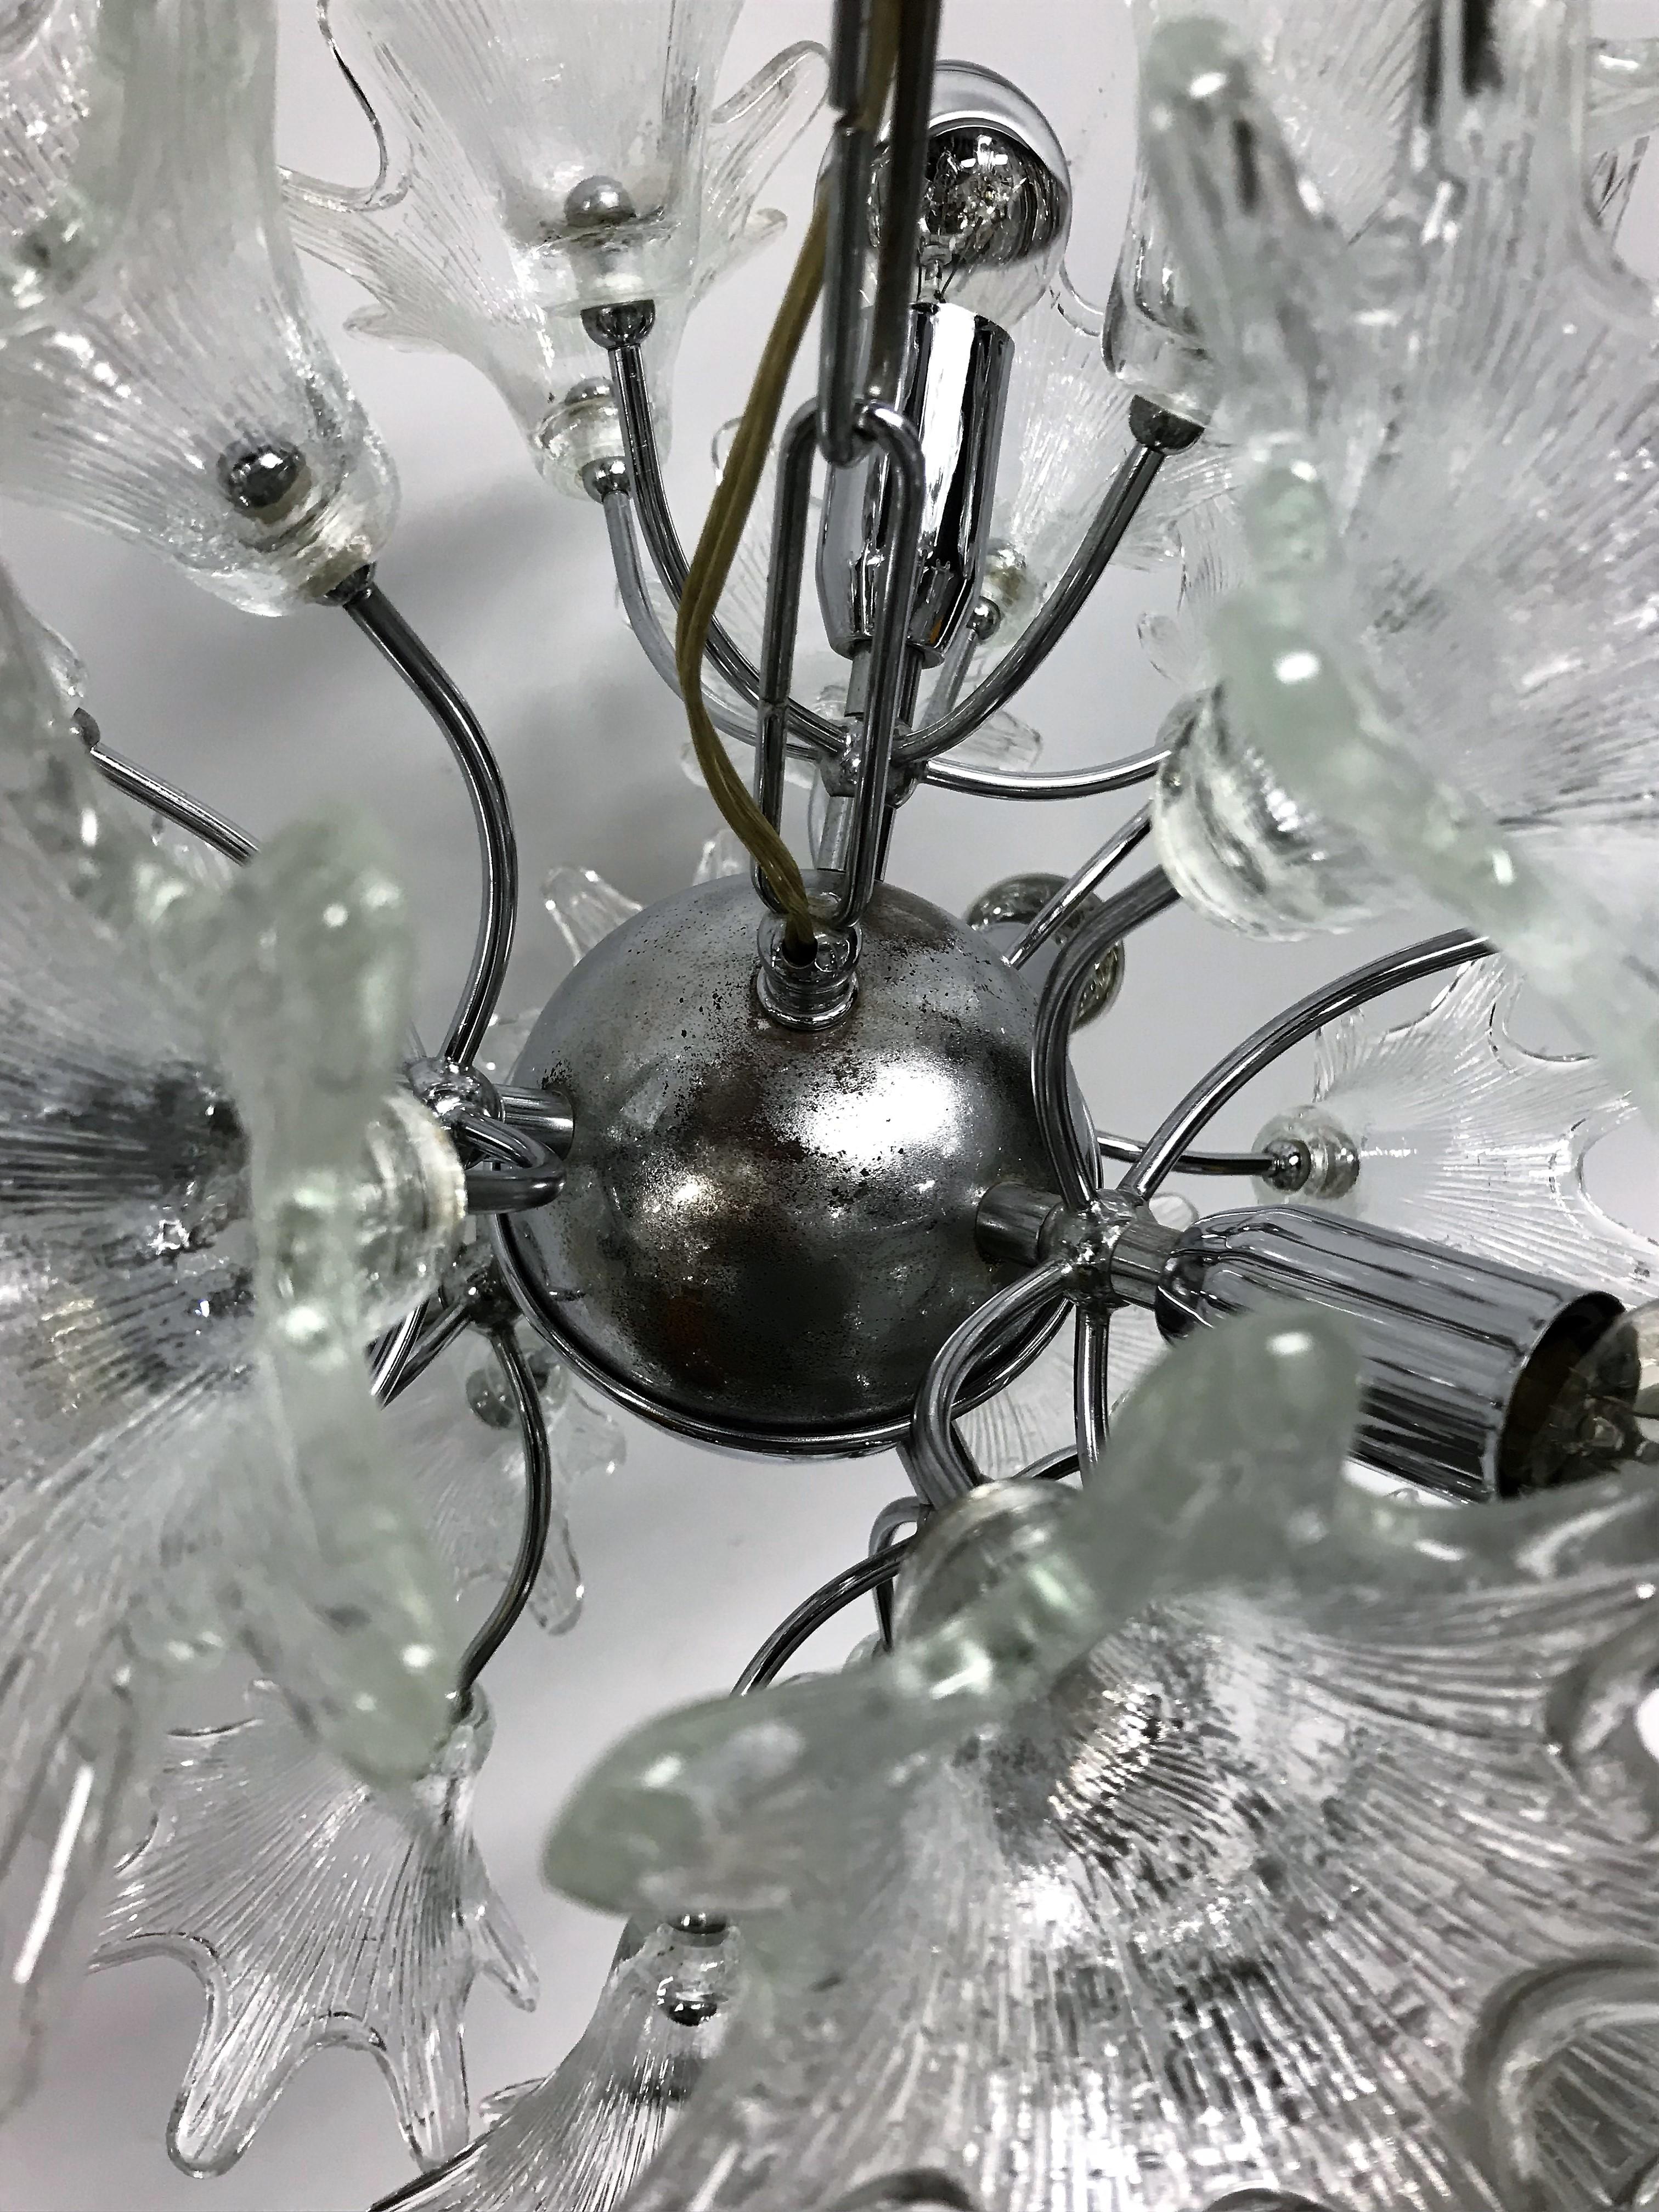 Vintage floral design sputnik chandelier with handblown crystal flower shaped glasses.

The chandelier has a chromed base and arms with beautiful patina.

All glasses are damage free and because they are hand made some may vary slightly in